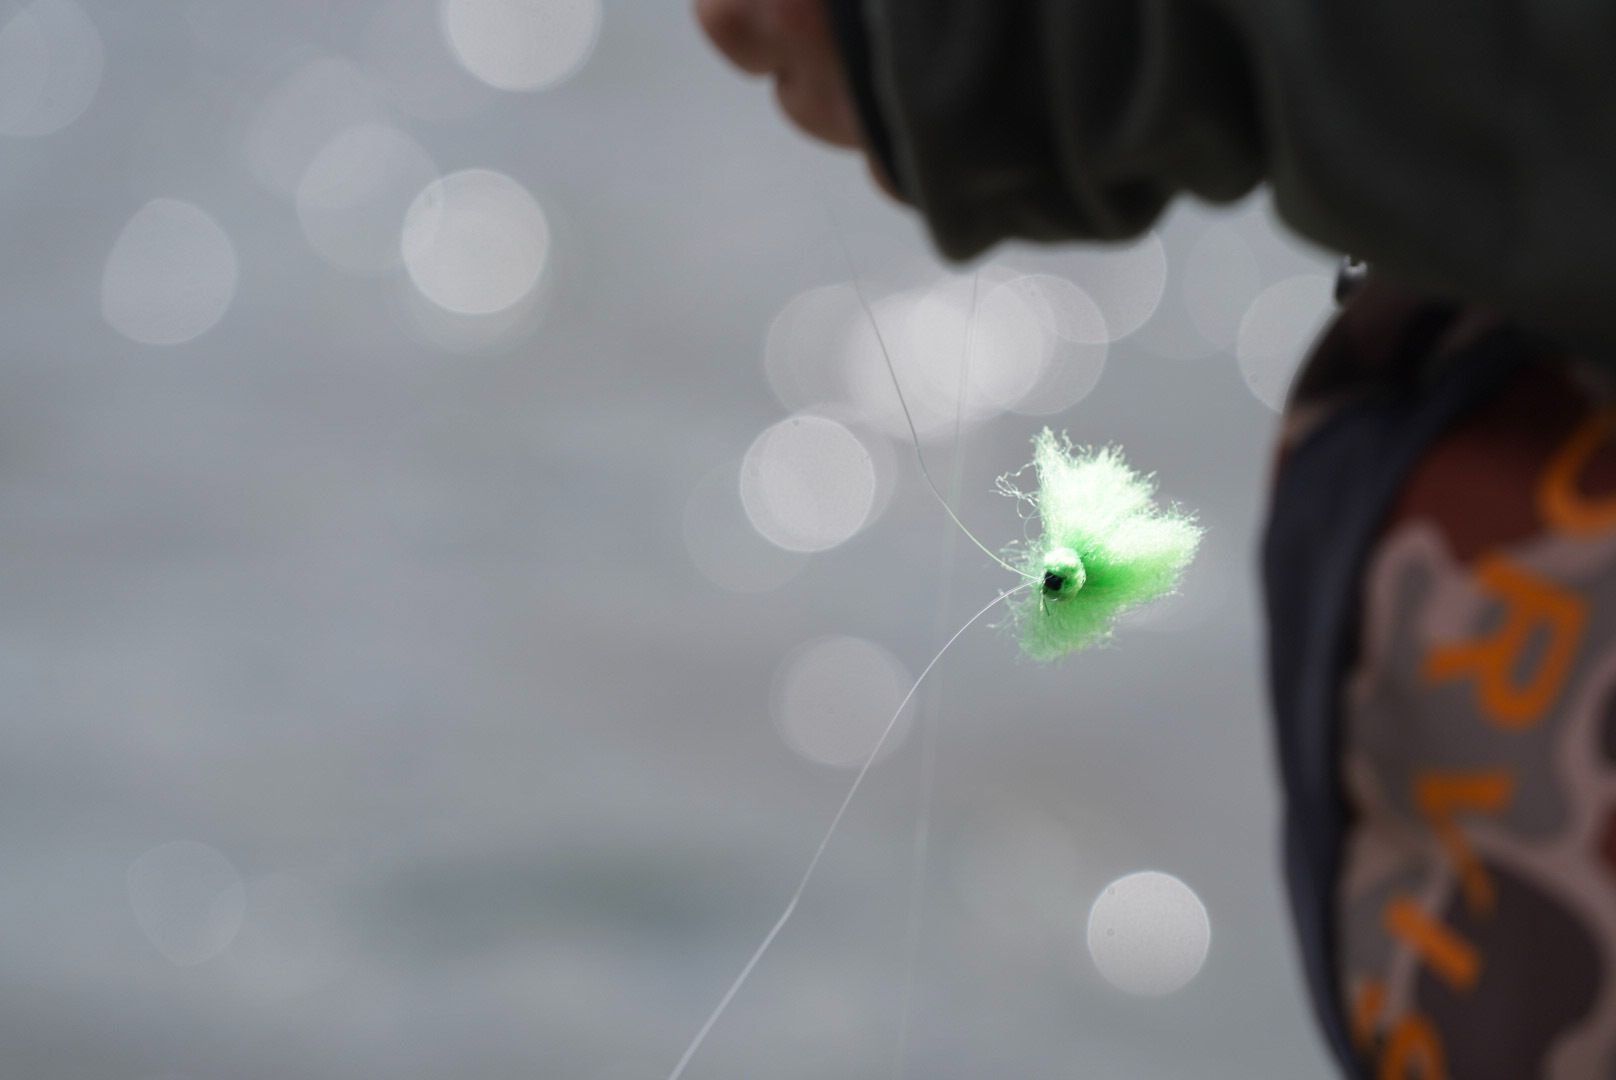 MONTHLY STRIKE INDICATOR REVIEW – SIMPLE FLY FISH